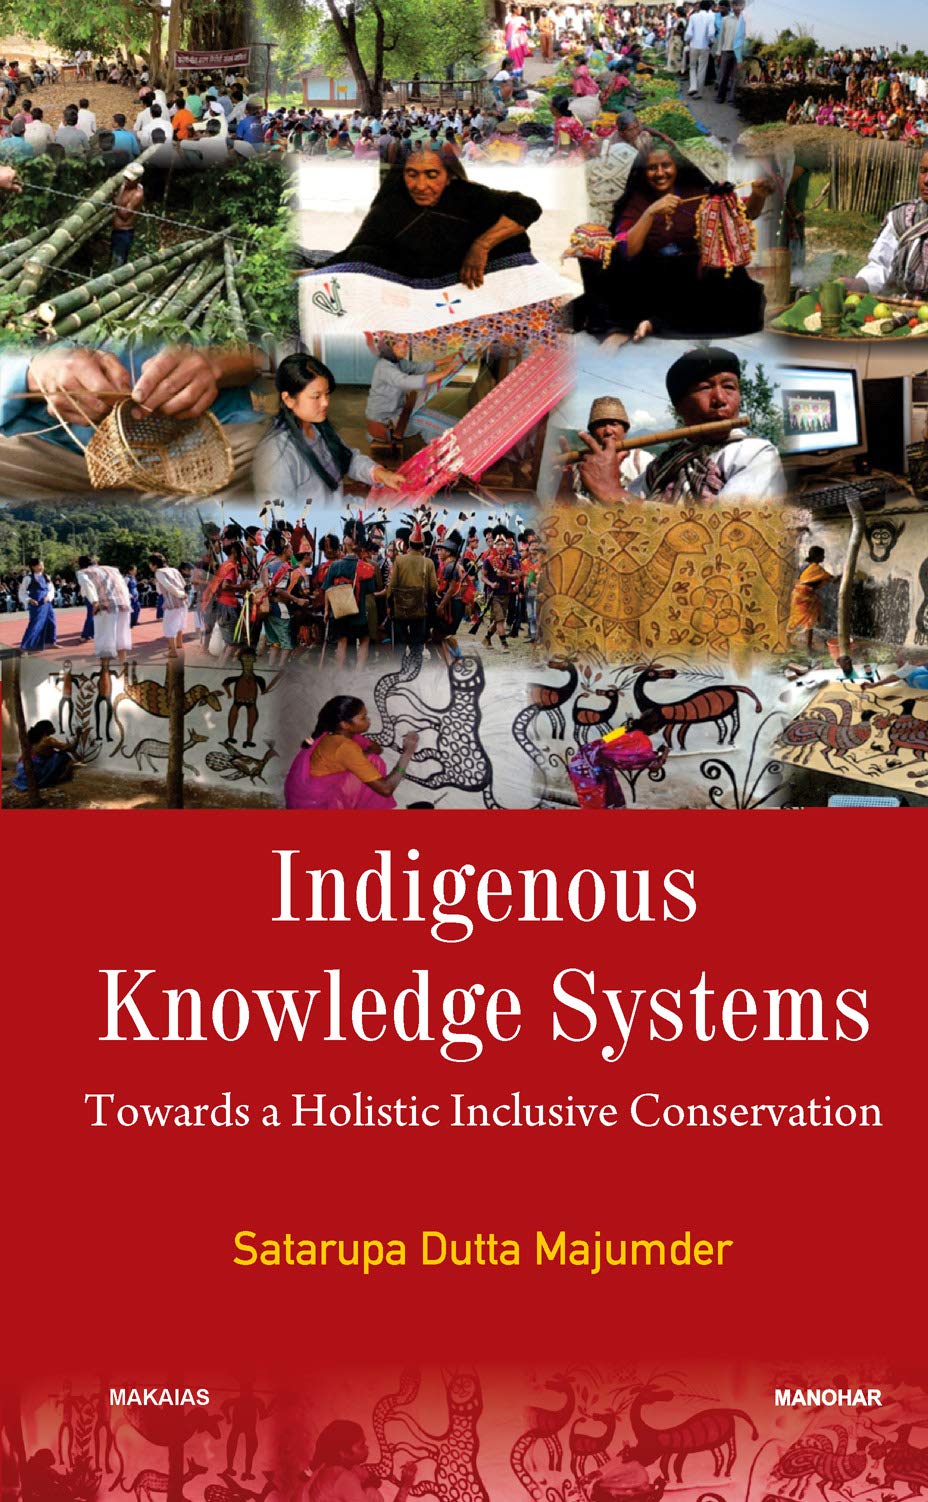 Indigenous Knowledge Systems: Towards a Holistic Inclusive Conservation